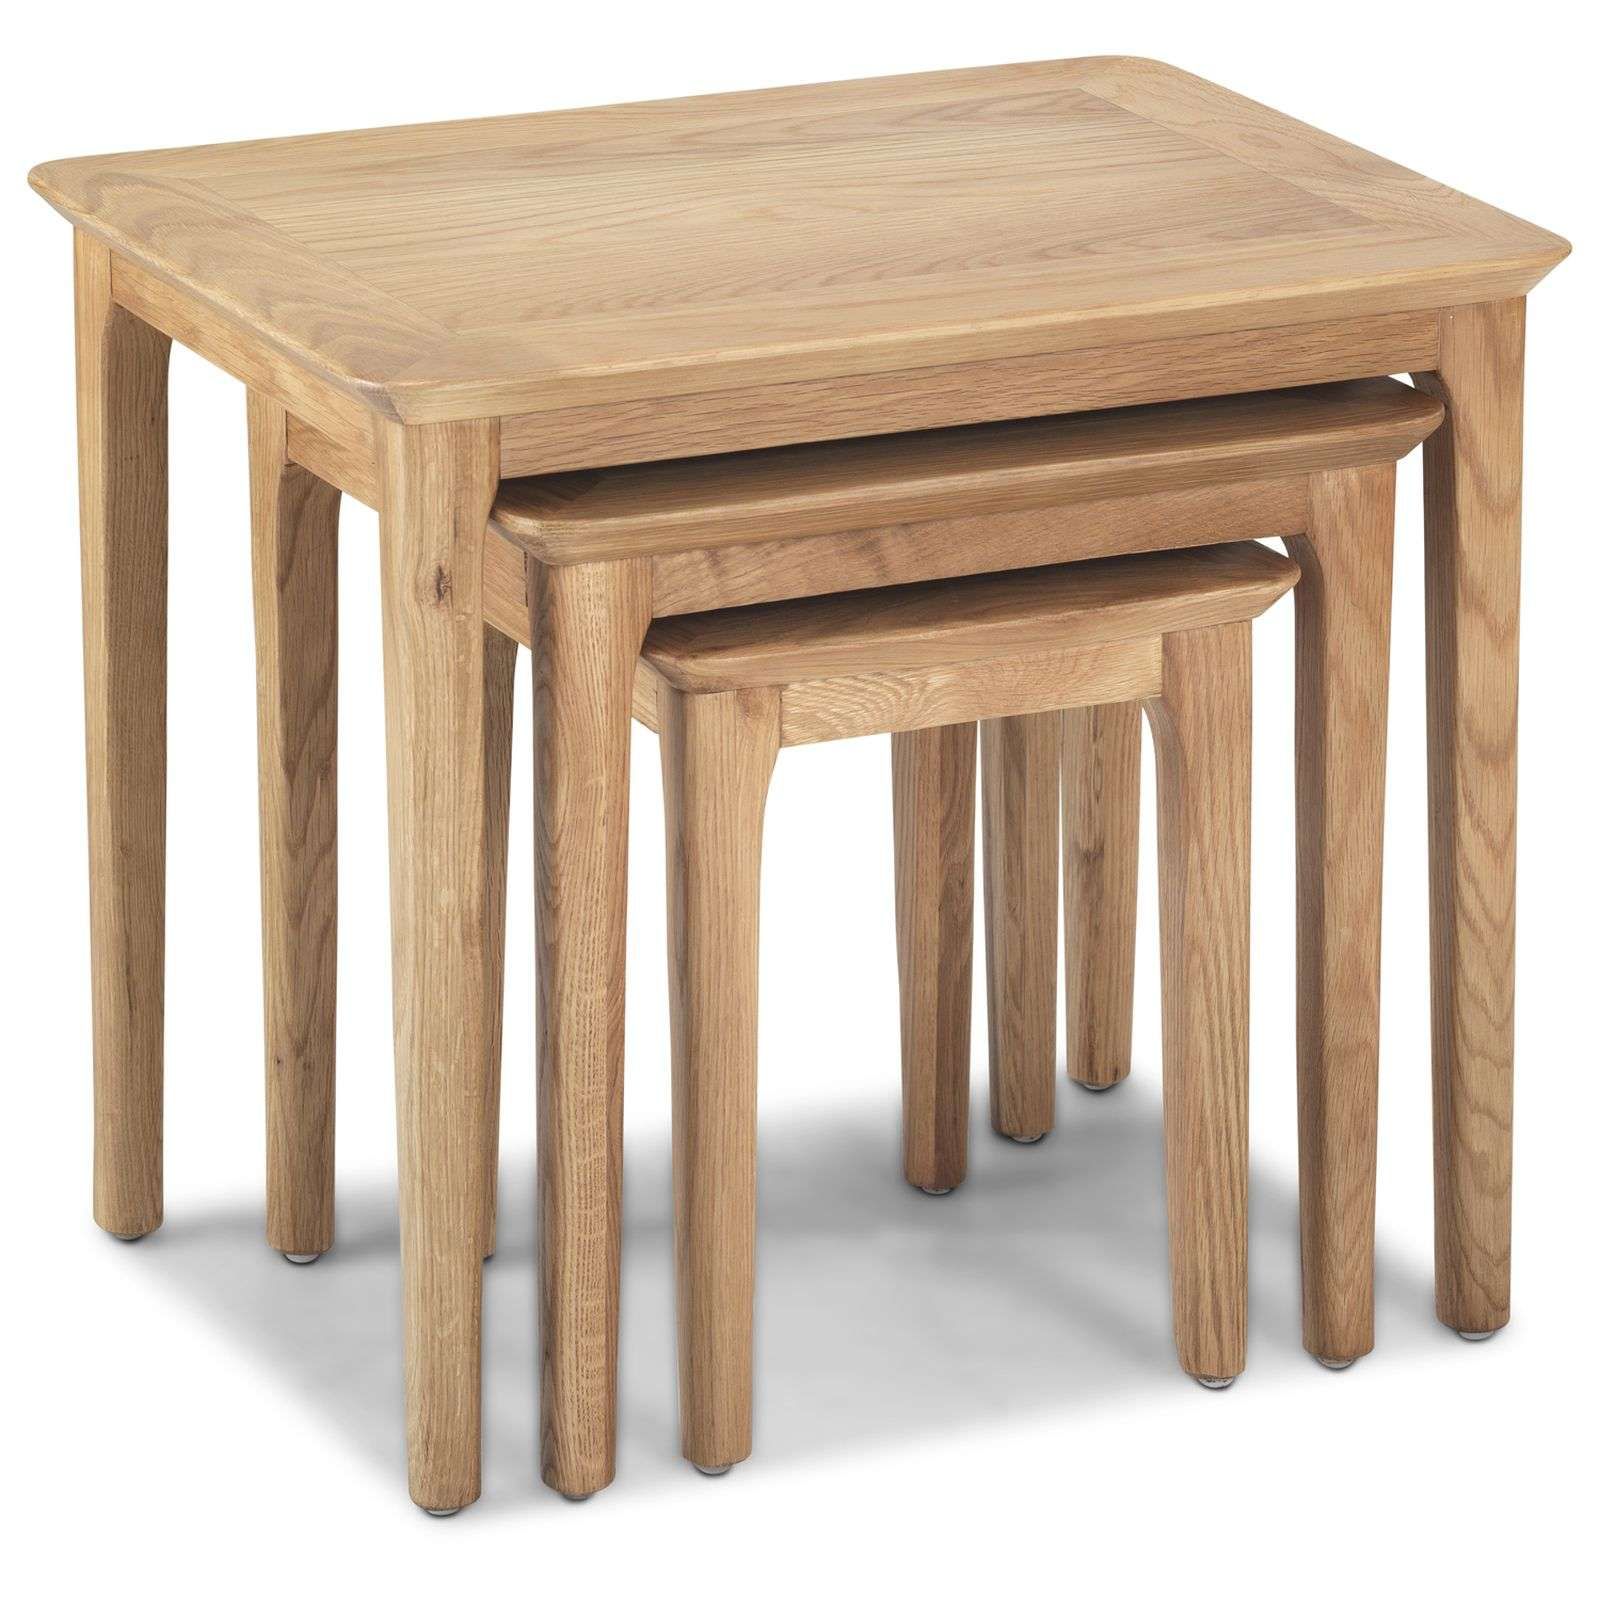 Telford Solid Oak Nest Of Three Coffee Tables – Discount Throughout Coffee Tables Of 3 Nesting Tables (View 8 of 20)